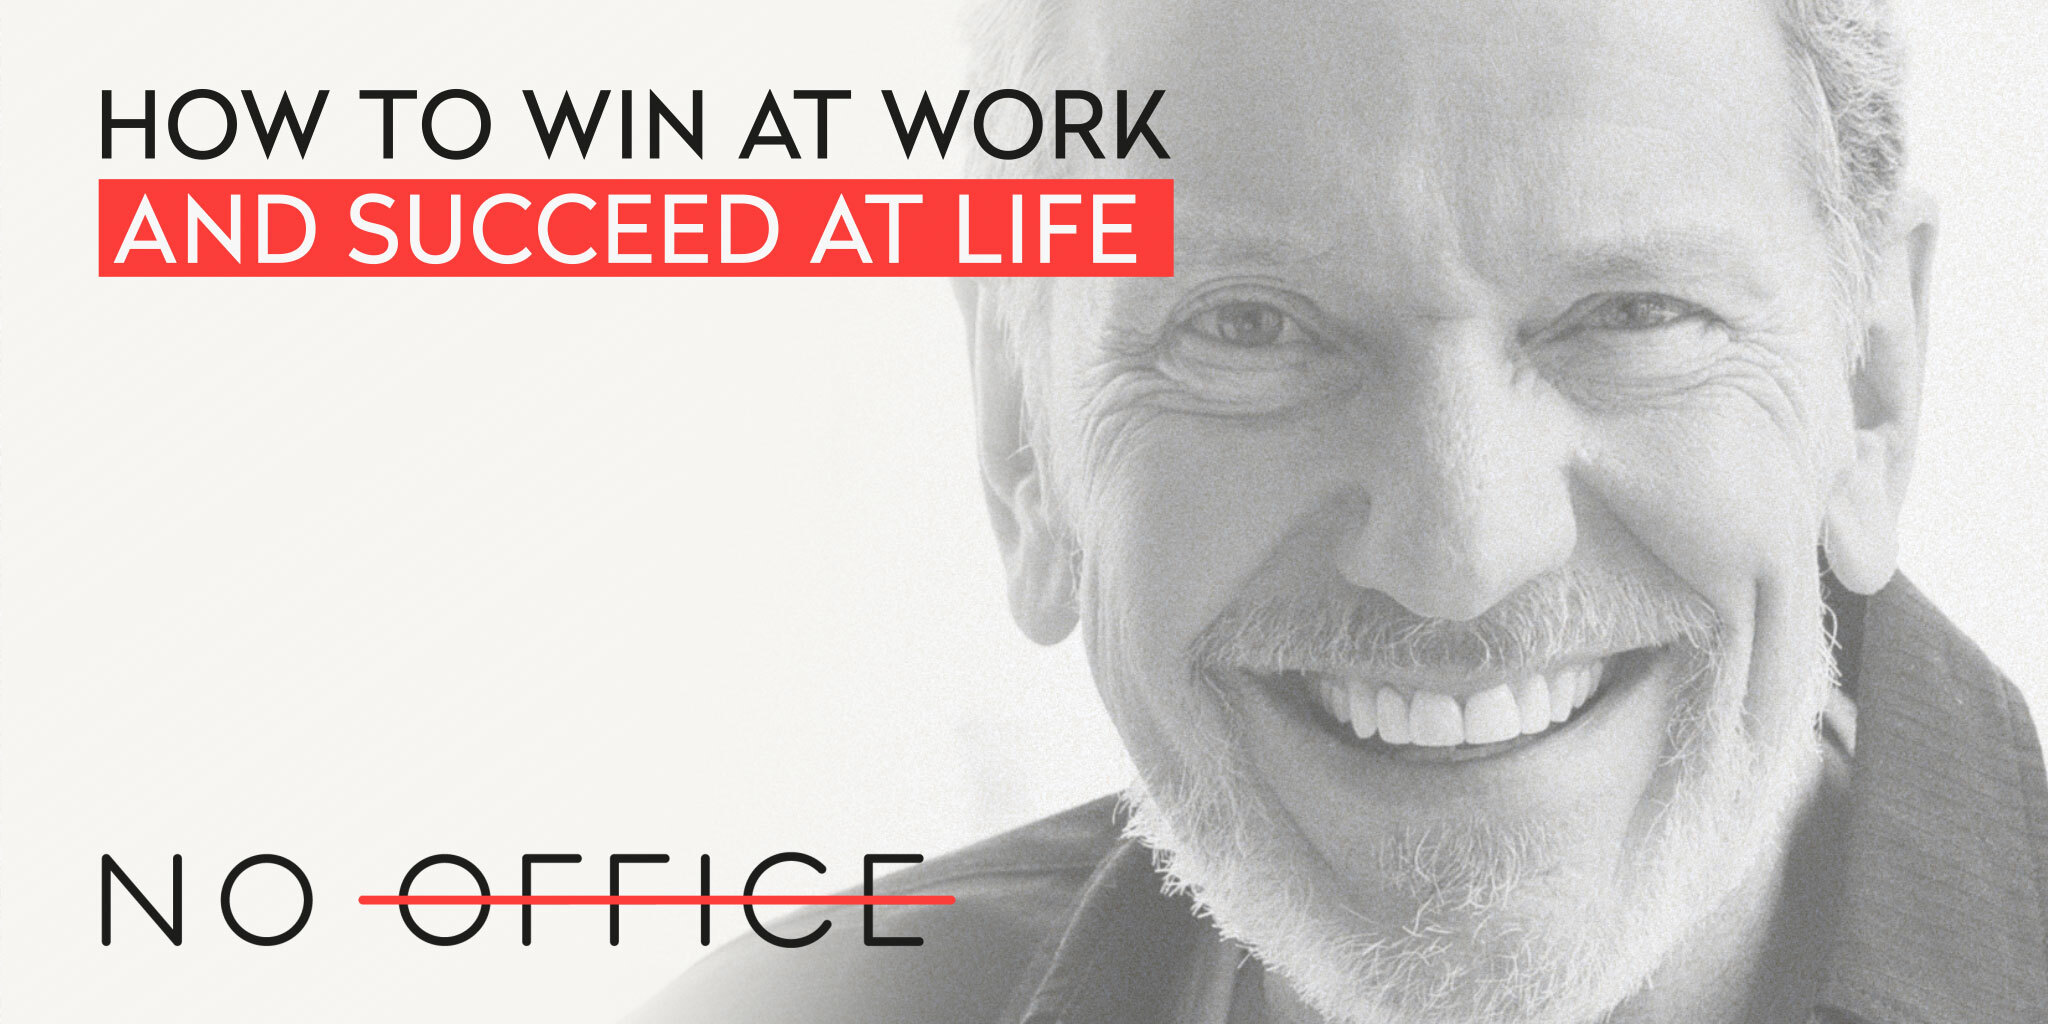 Work-Life Balance Discussion With Michael Hyatt - The *No Office* Podcast, ep. 20